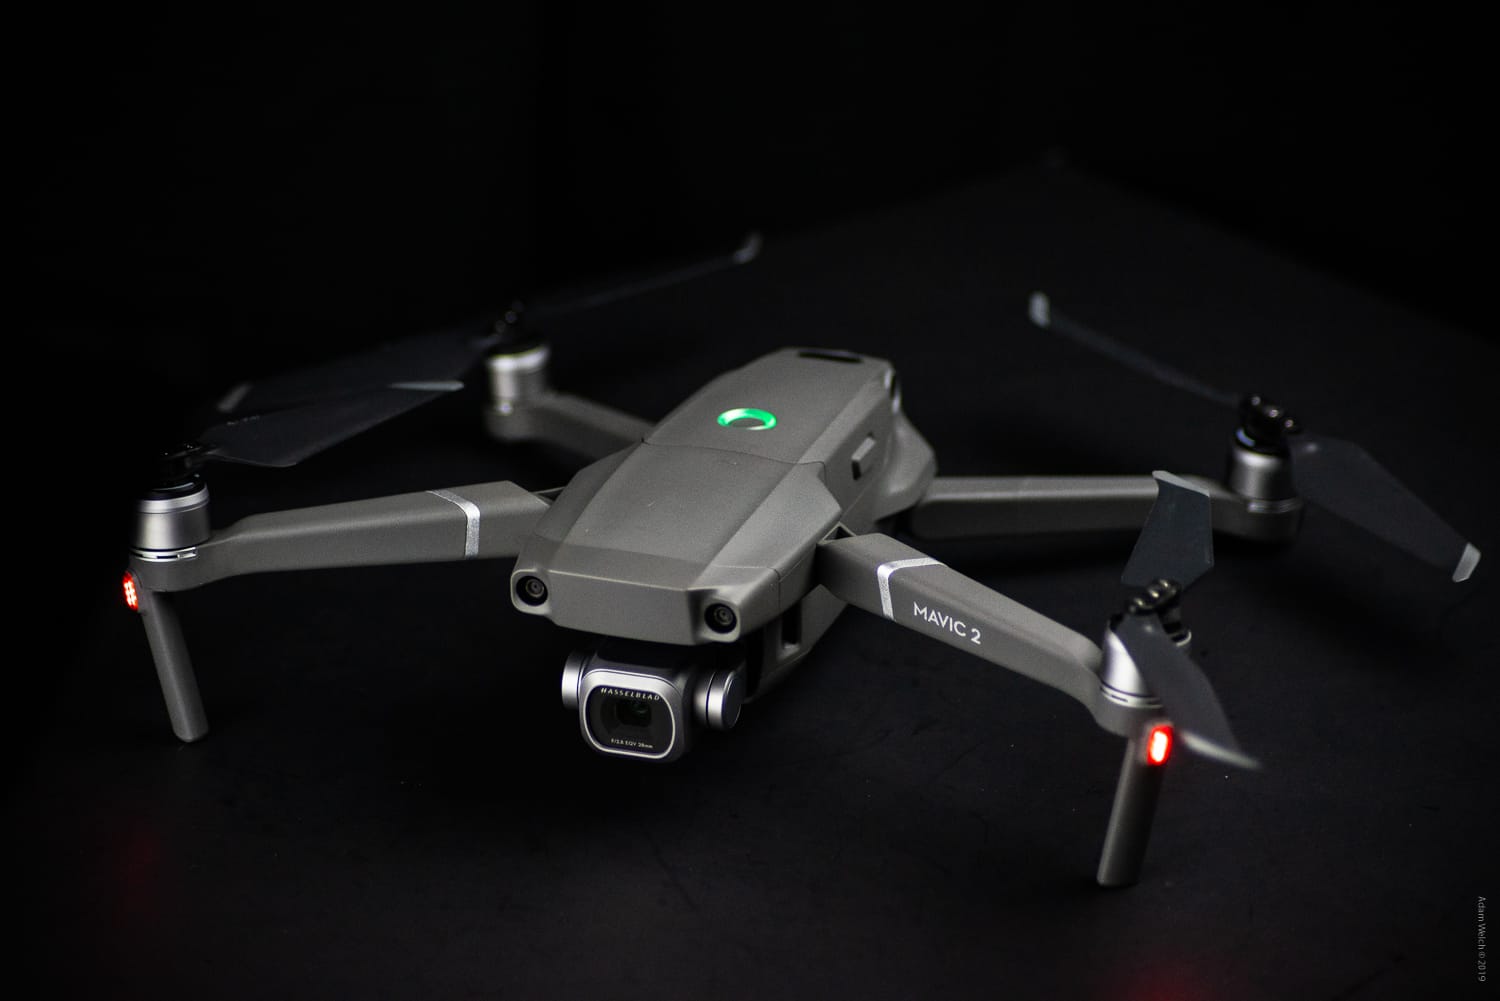 controlador Desear Unidad Detailed Review of the Mavic 2 Pro Drone from DJI | Contrastly